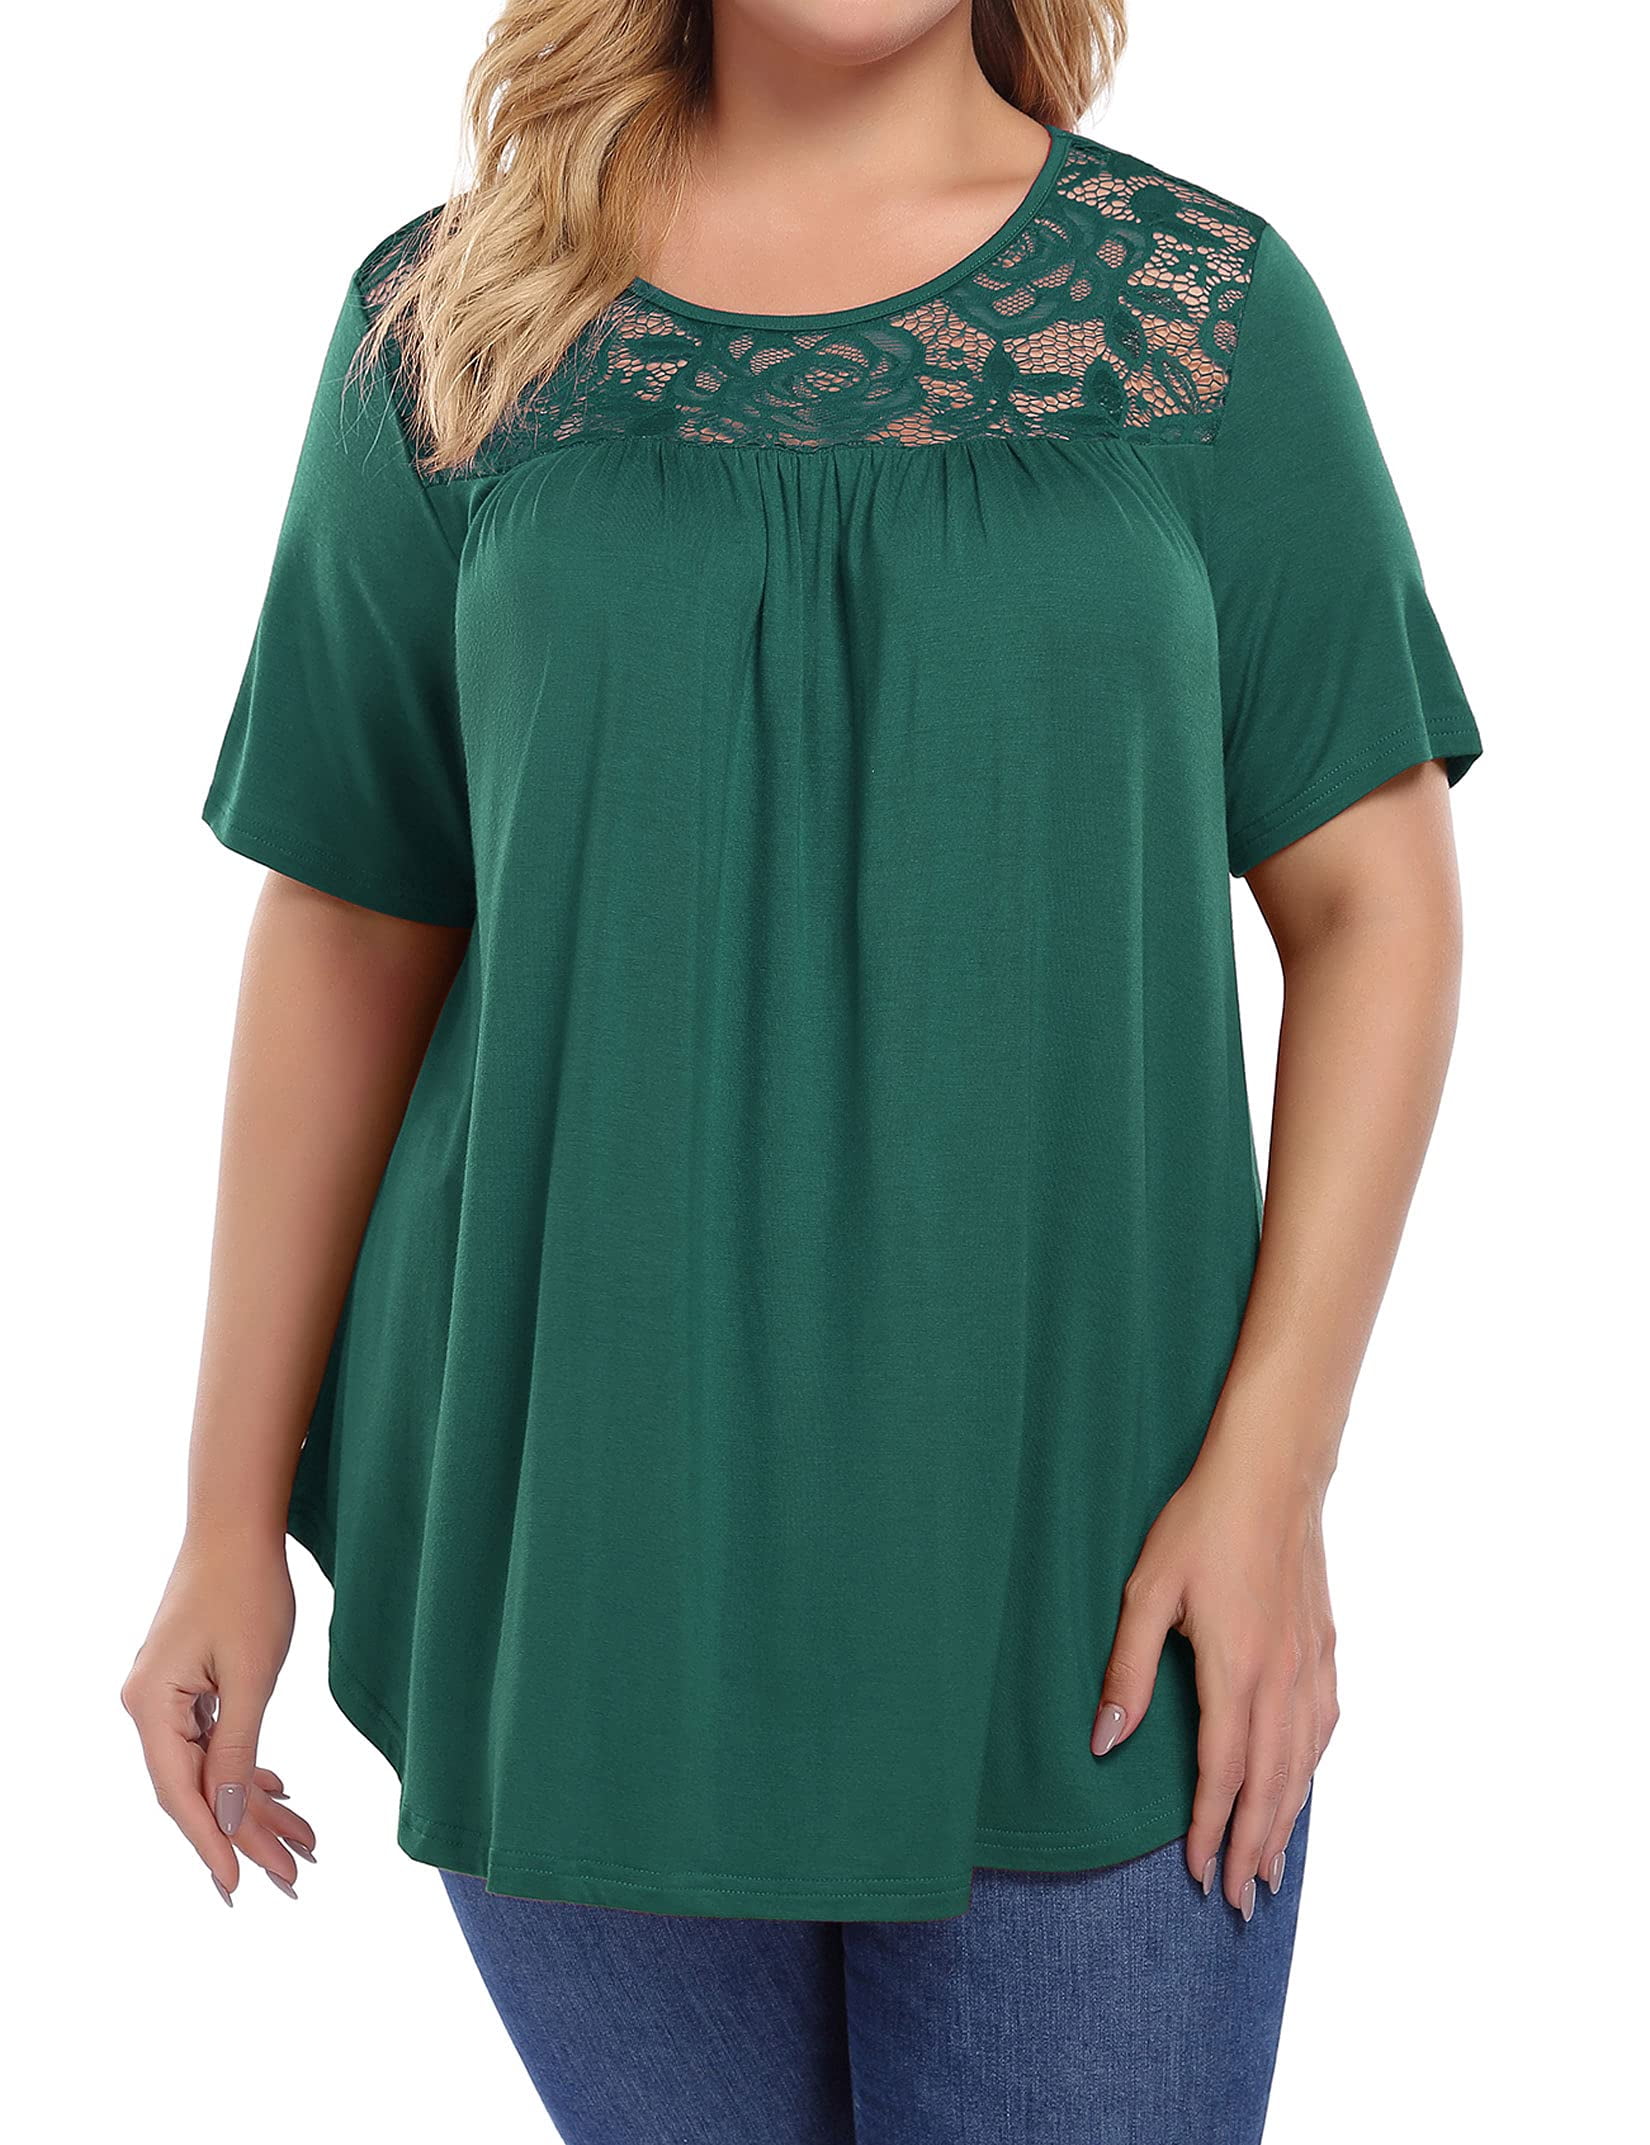 Rivelino Women's Plus Size Summer Tops Short Sleeve Shirts Lace Pleated ...